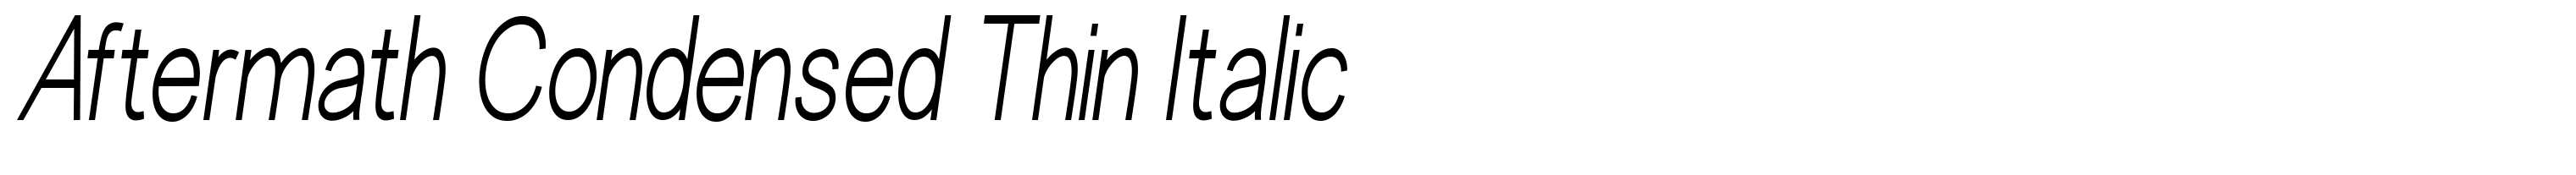 Aftermath Condensed Thin Italic